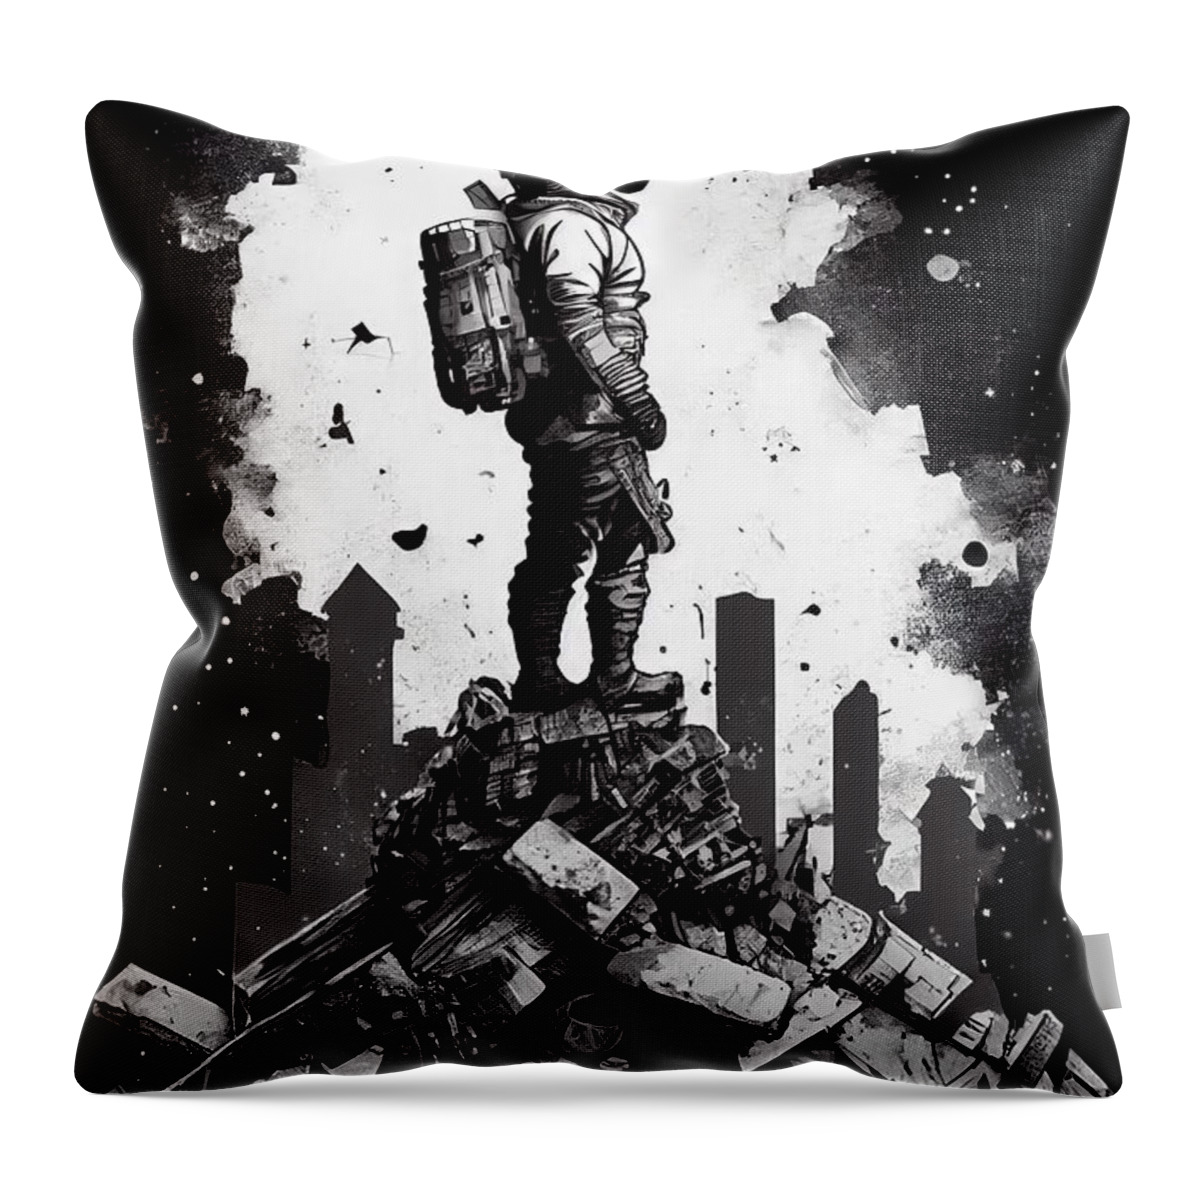 Astronaut Throw Pillow featuring the painting Devastation by N Akkash